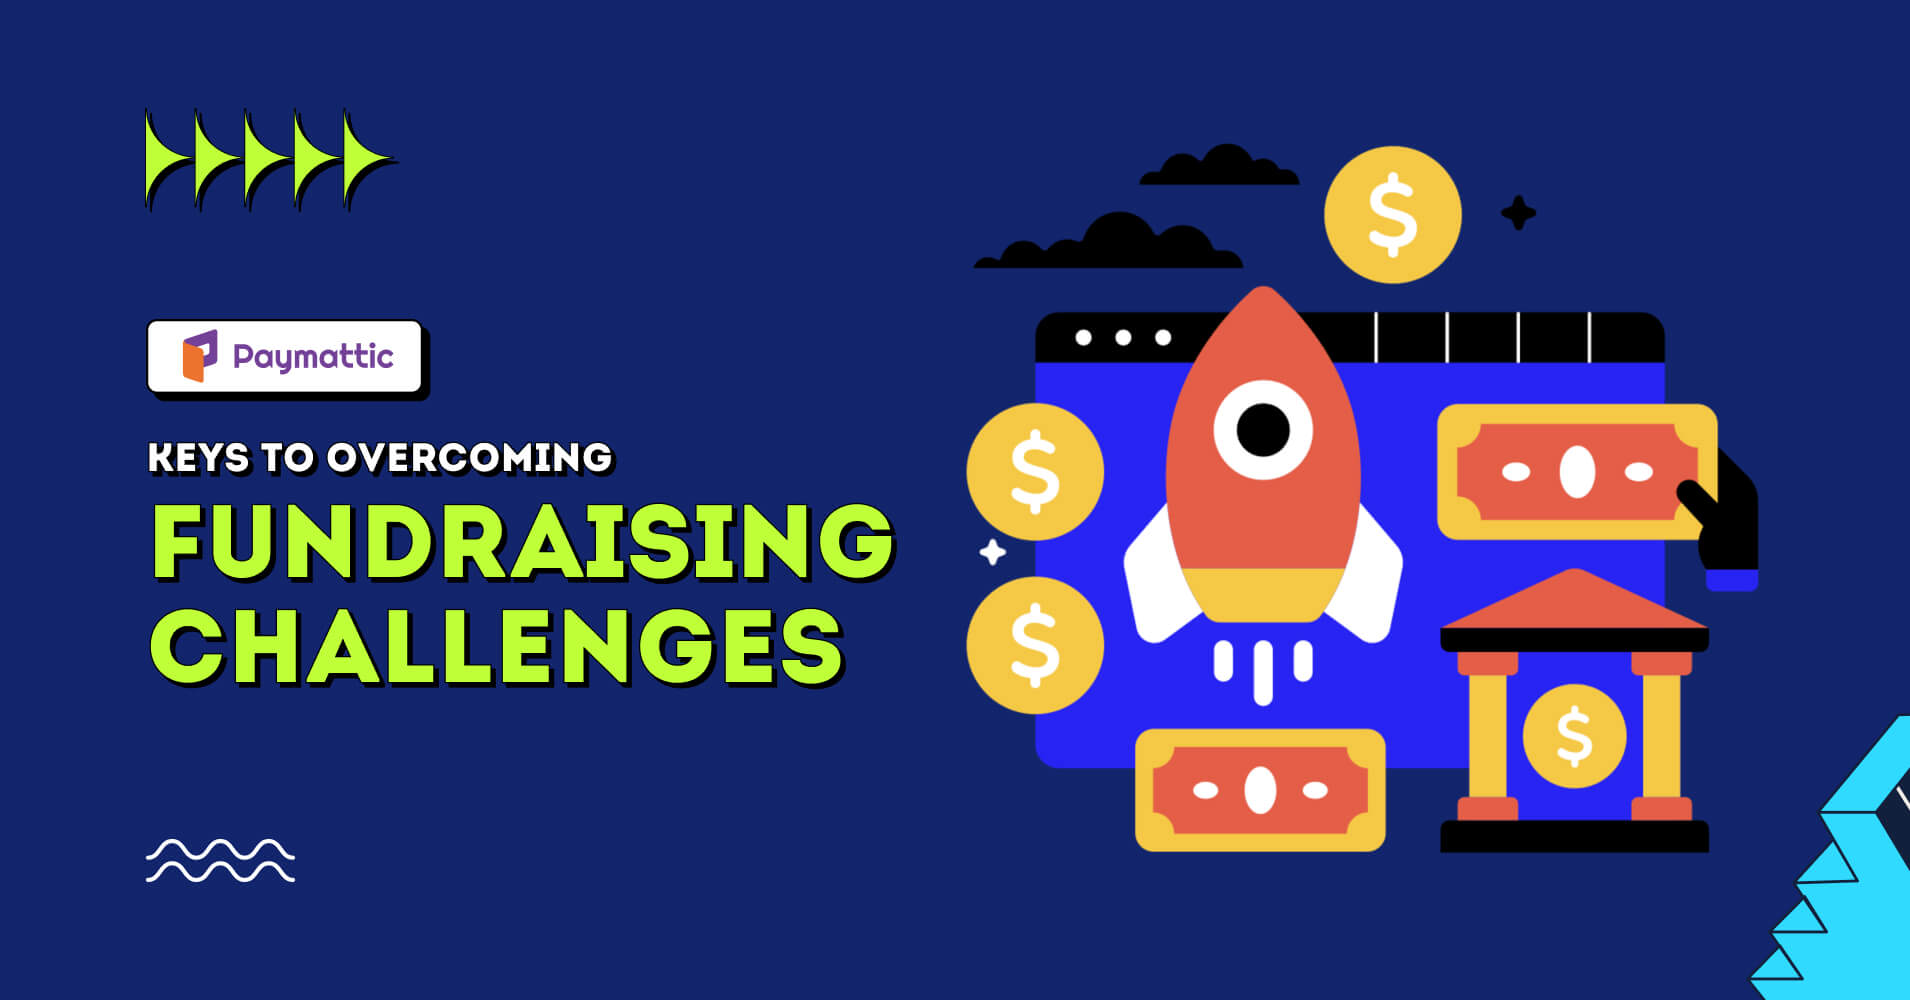 The Keys to Overcoming Fundraising Challenges